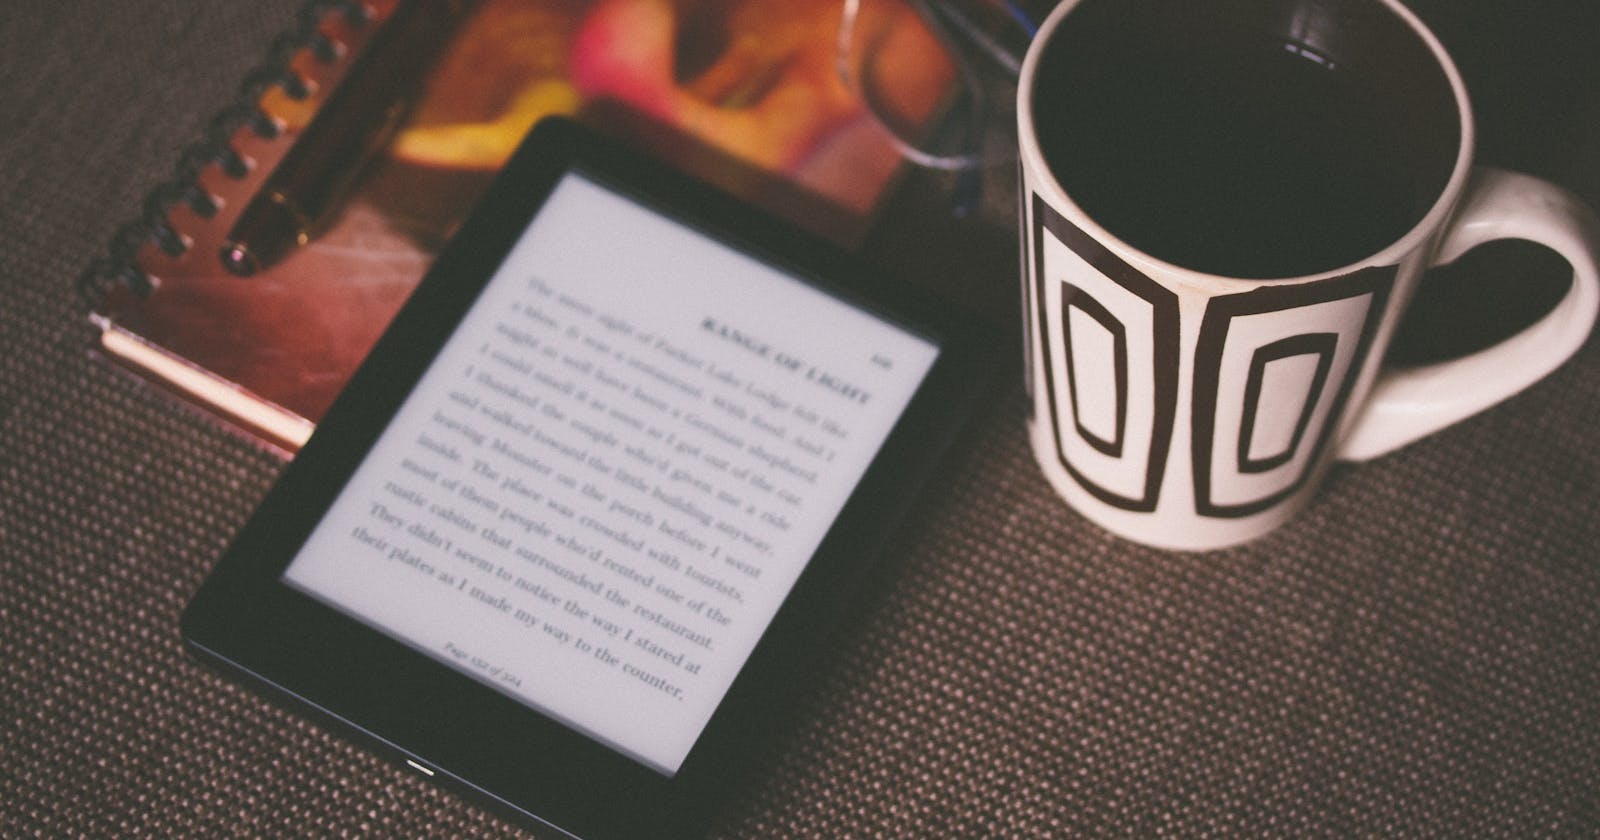 Quick Tips: How to upload your own books to Kindle App in Android